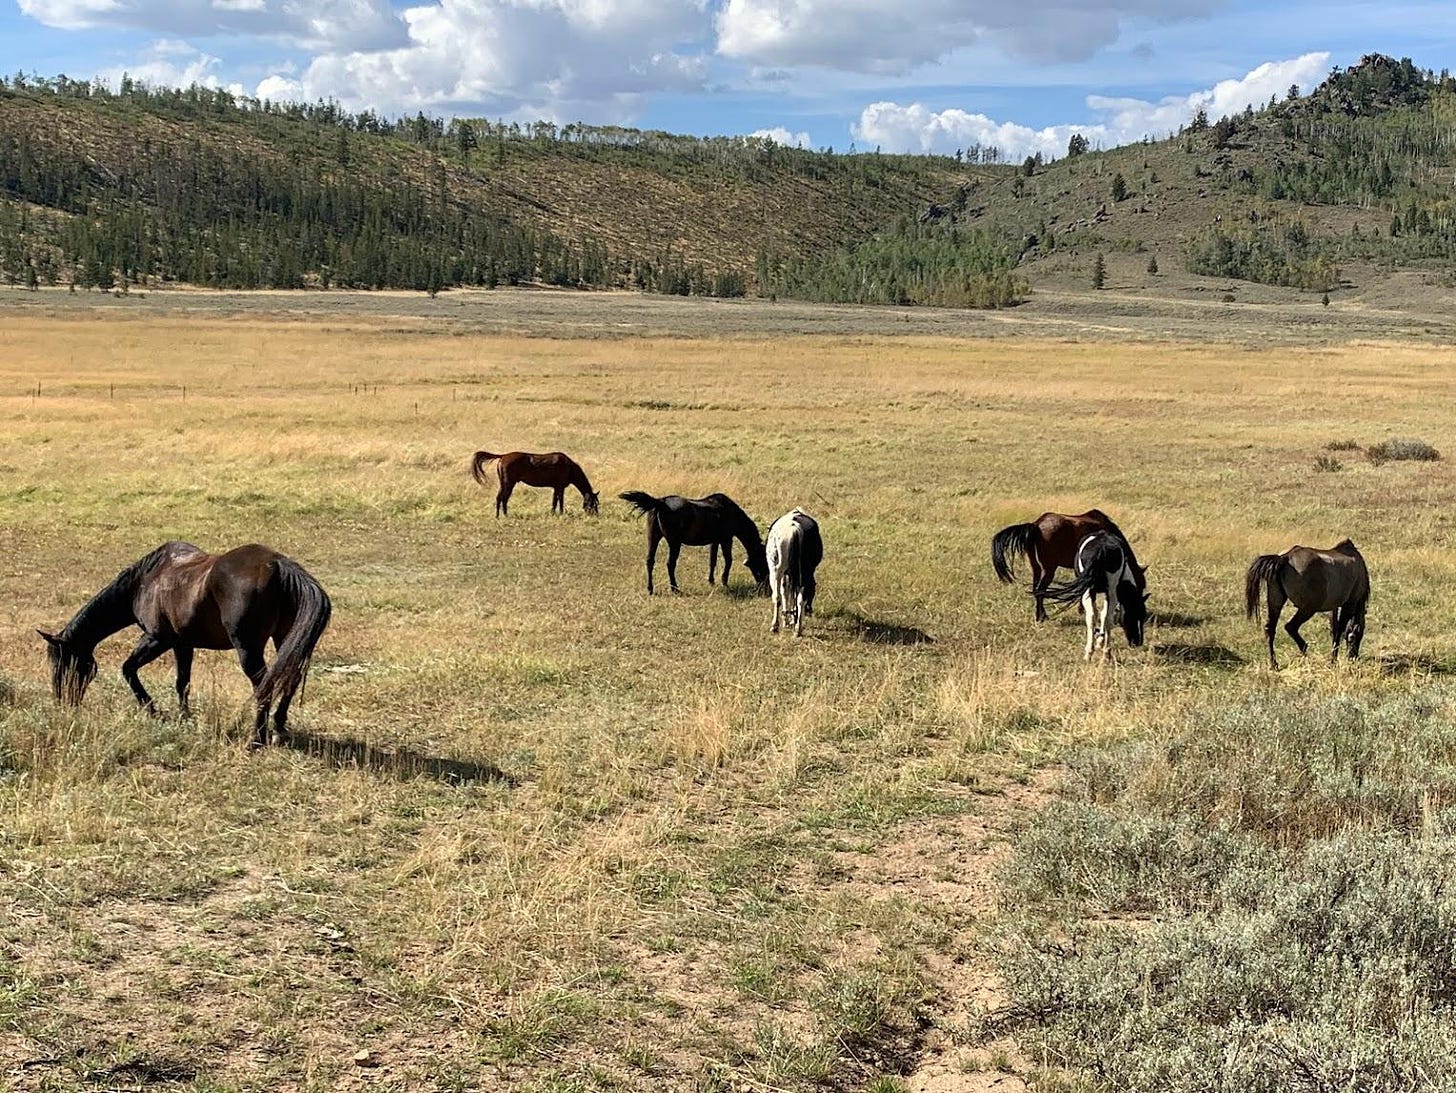 A group of horses grazing in a field

Description automatically generated